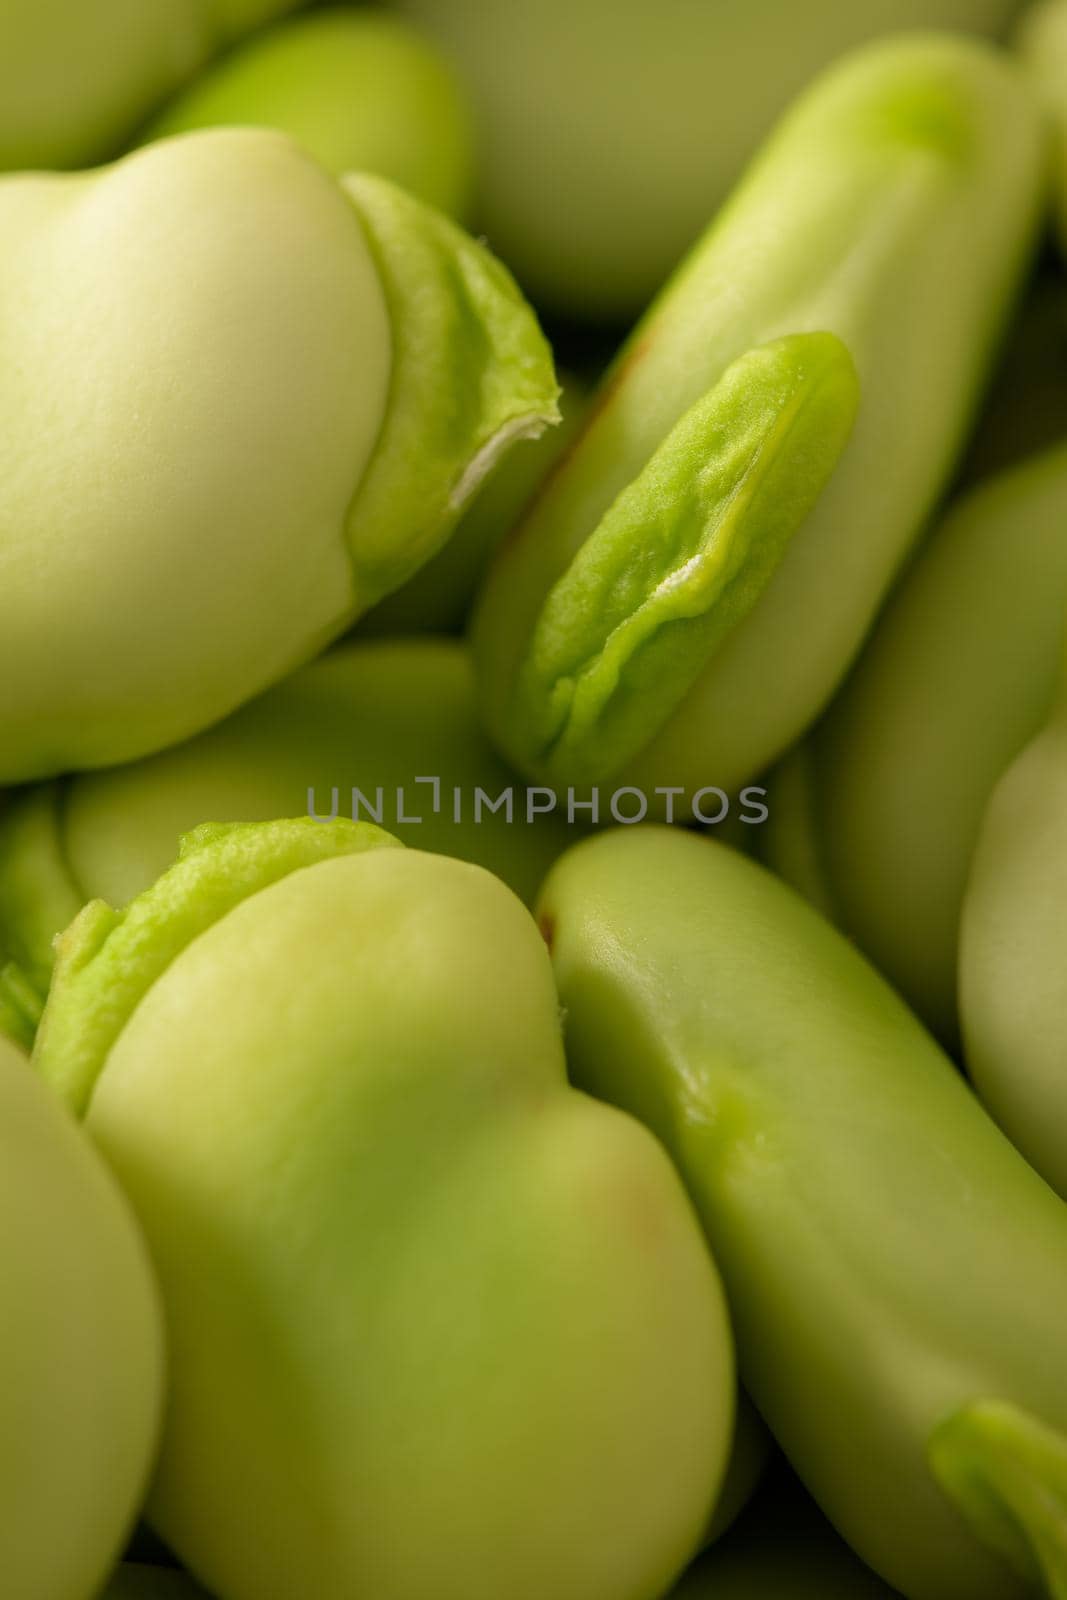 Fresh and raw green broad beans by homydesign